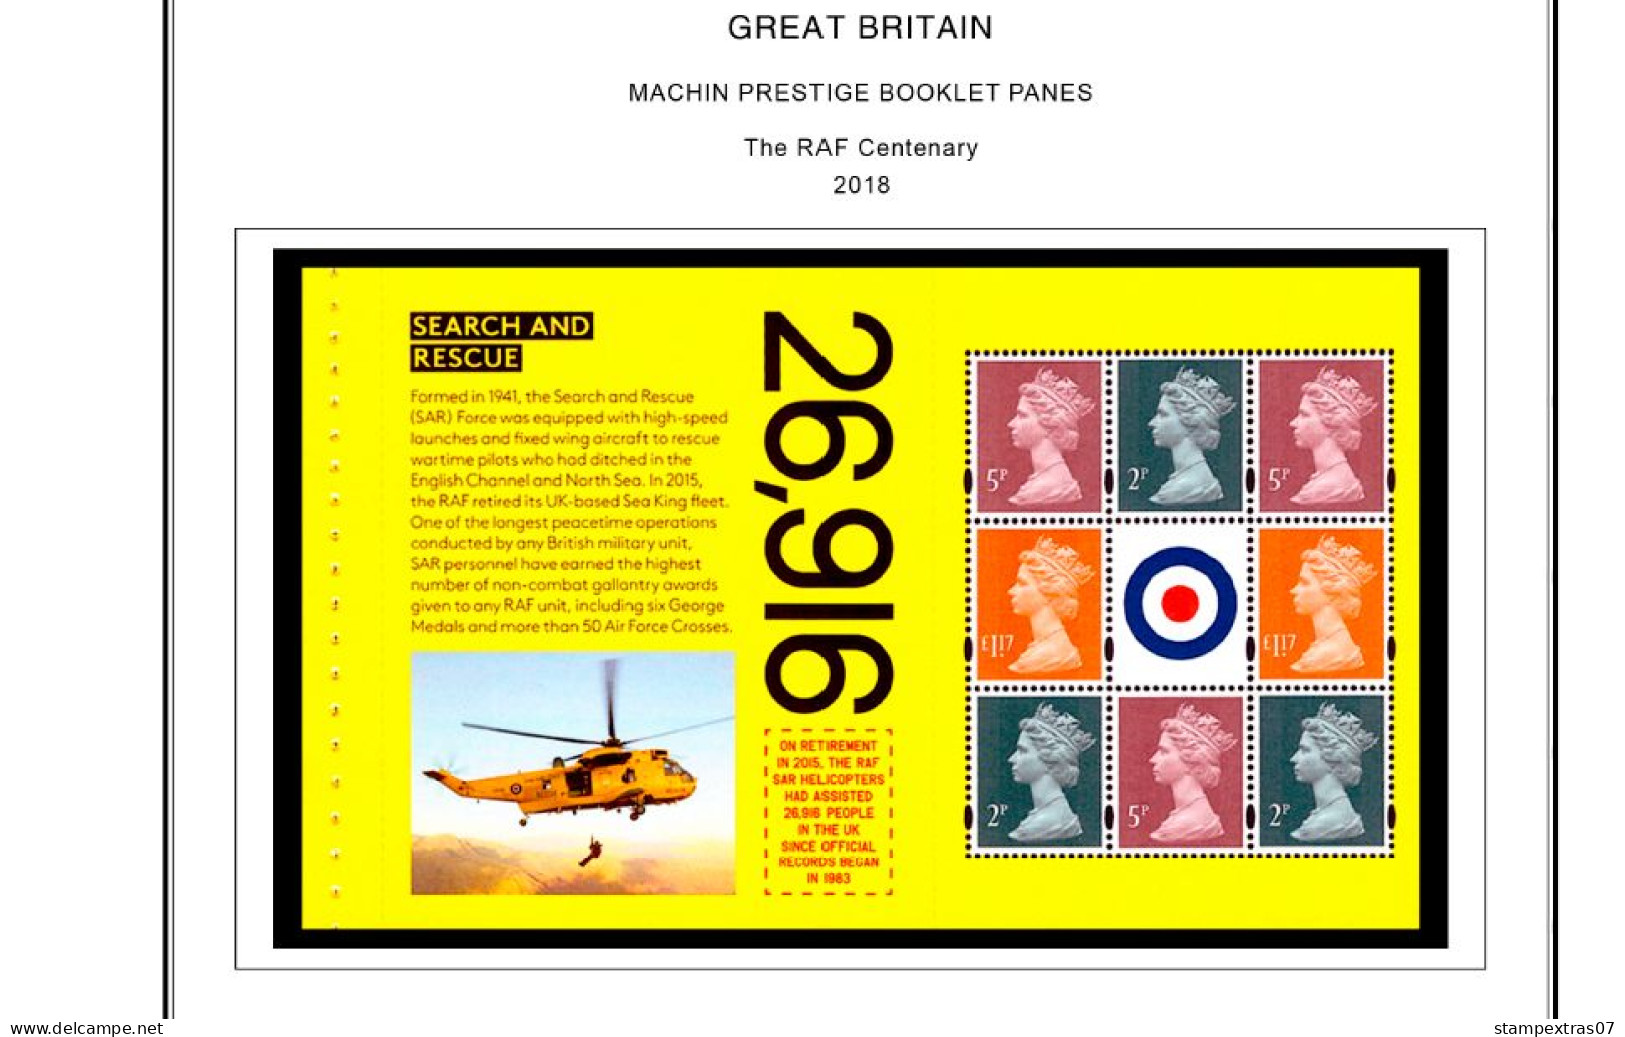 COLOR PRINTED GREAT BRITAIN MACHIN PRESTIGE PANES 1969-2023 STAMP ALBUM PAGES (121 illustrated pages) >> FEUILLES ALBUM